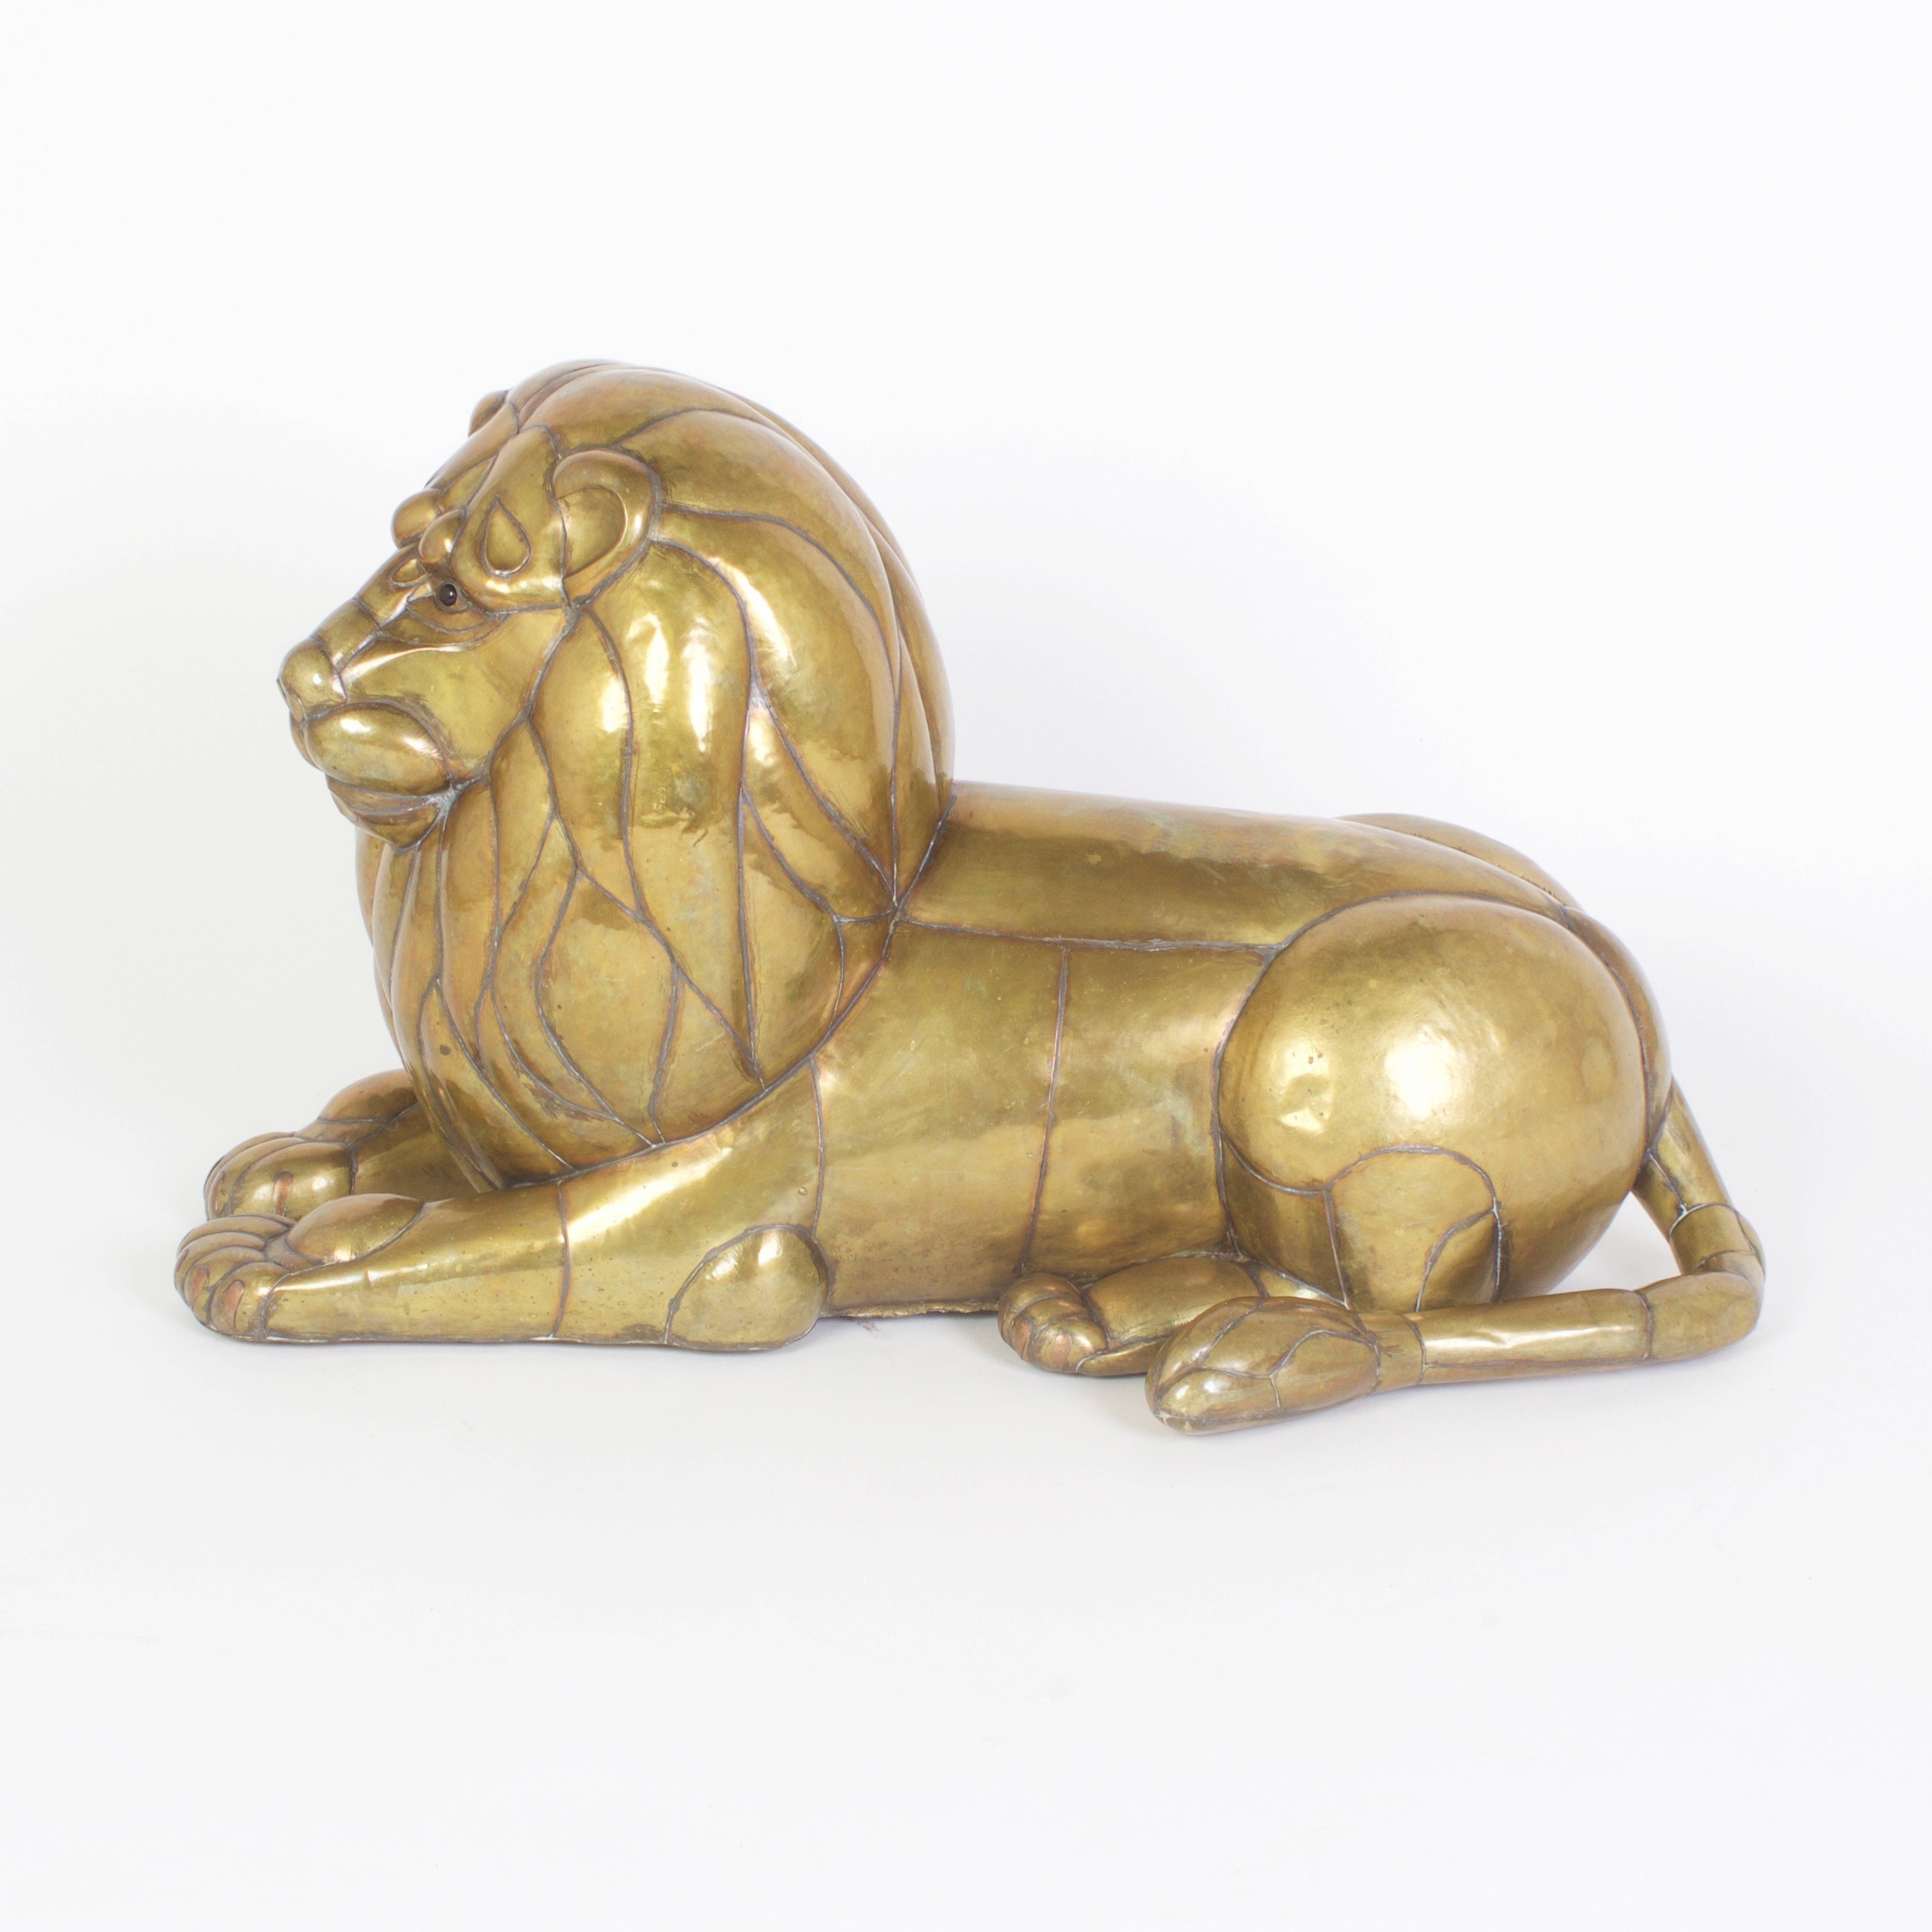 Impressive Mid-Century Sergio Bustamante brass sculpture of a lion with all his majesty in repose. Pieced together like a puzzle and highlighted with copper claws and glass eyes. 

